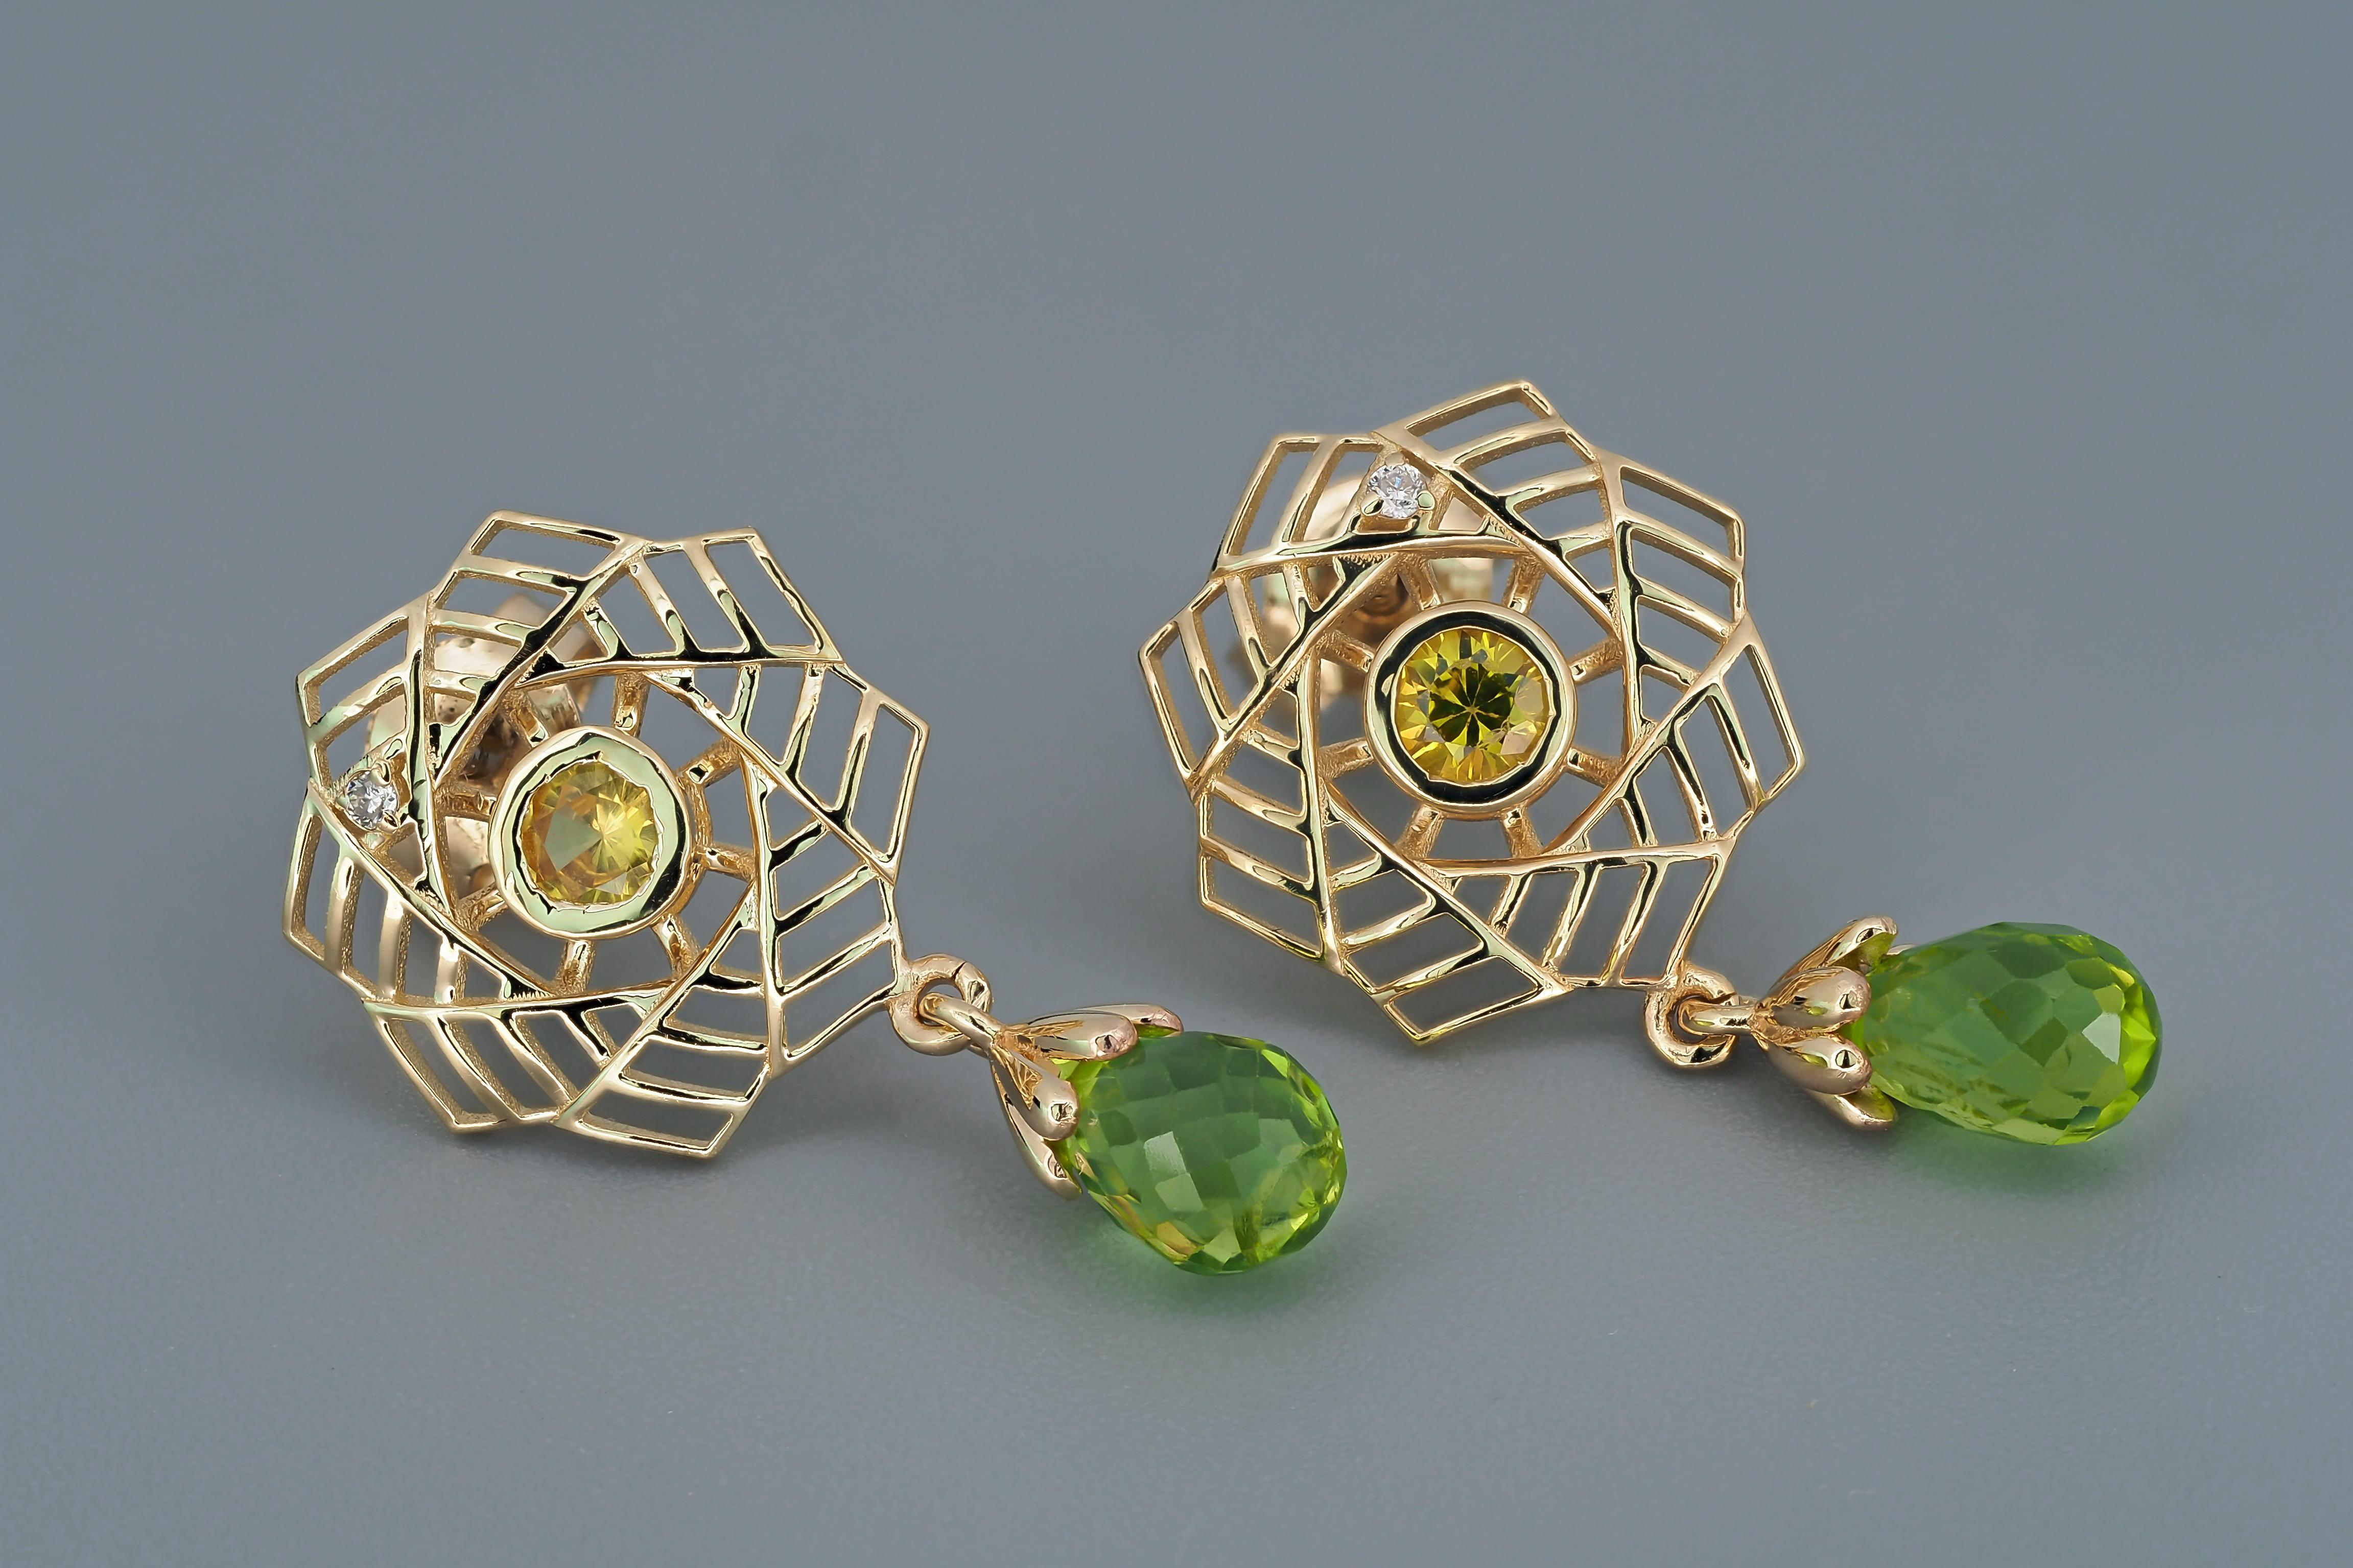 14k gold earrings with peridots, sapphires and diamonds. 
Peridot earrings in 14k gold. Yellow sapphire studs. Briollette peridot earrings.

Material: 14k gold
Weight: 2.80 g.
Earrings size: 25 x 14 mm.

Peridots:
2 pieces, green - color, briolette